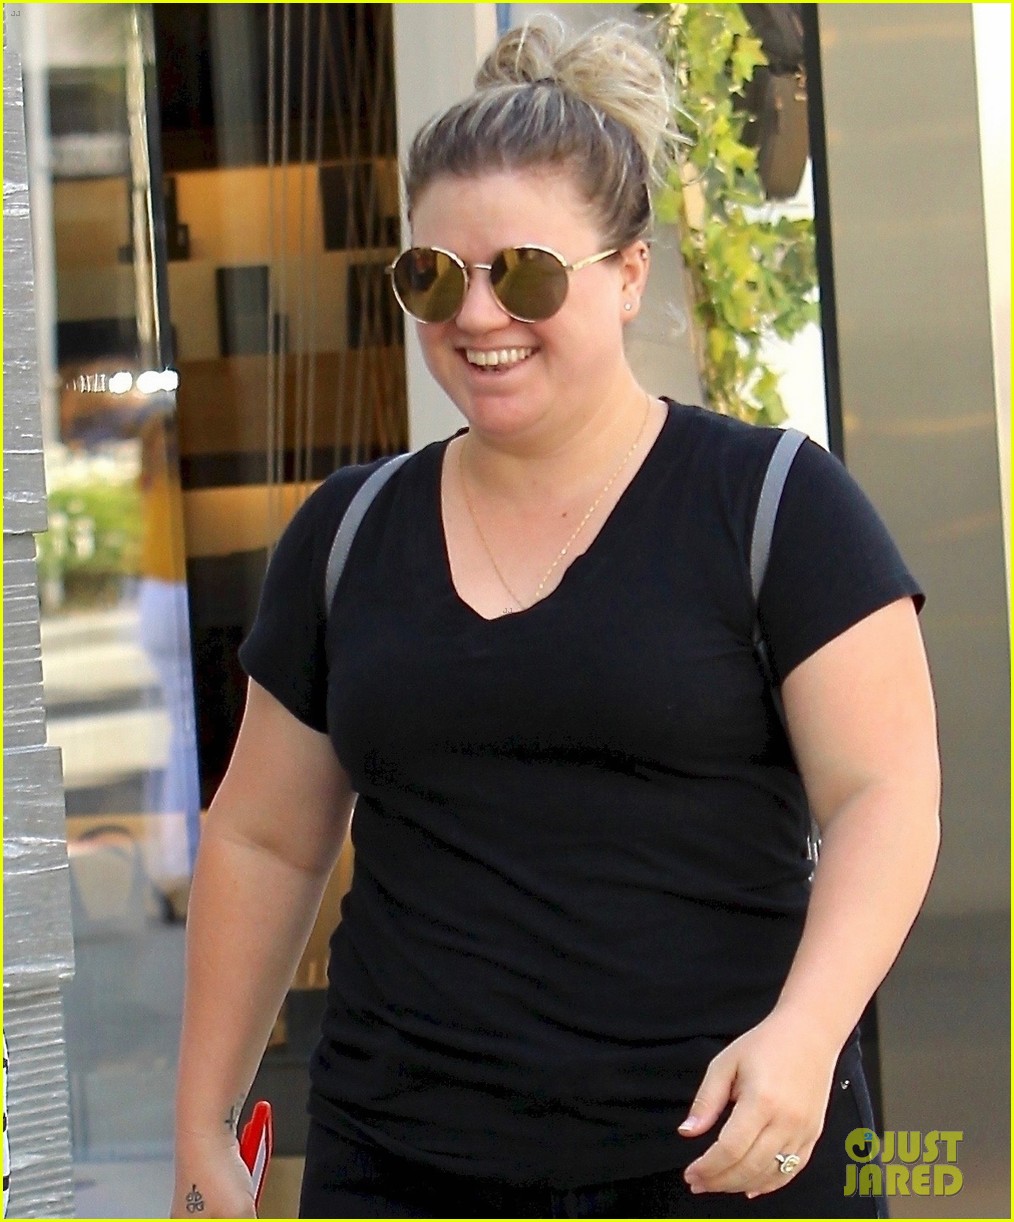 Kelly Clarkson Has Fun with Photographers in Beverly Hills!: Photo 3934843  | Kelly Clarkson Pictures | Just Jared